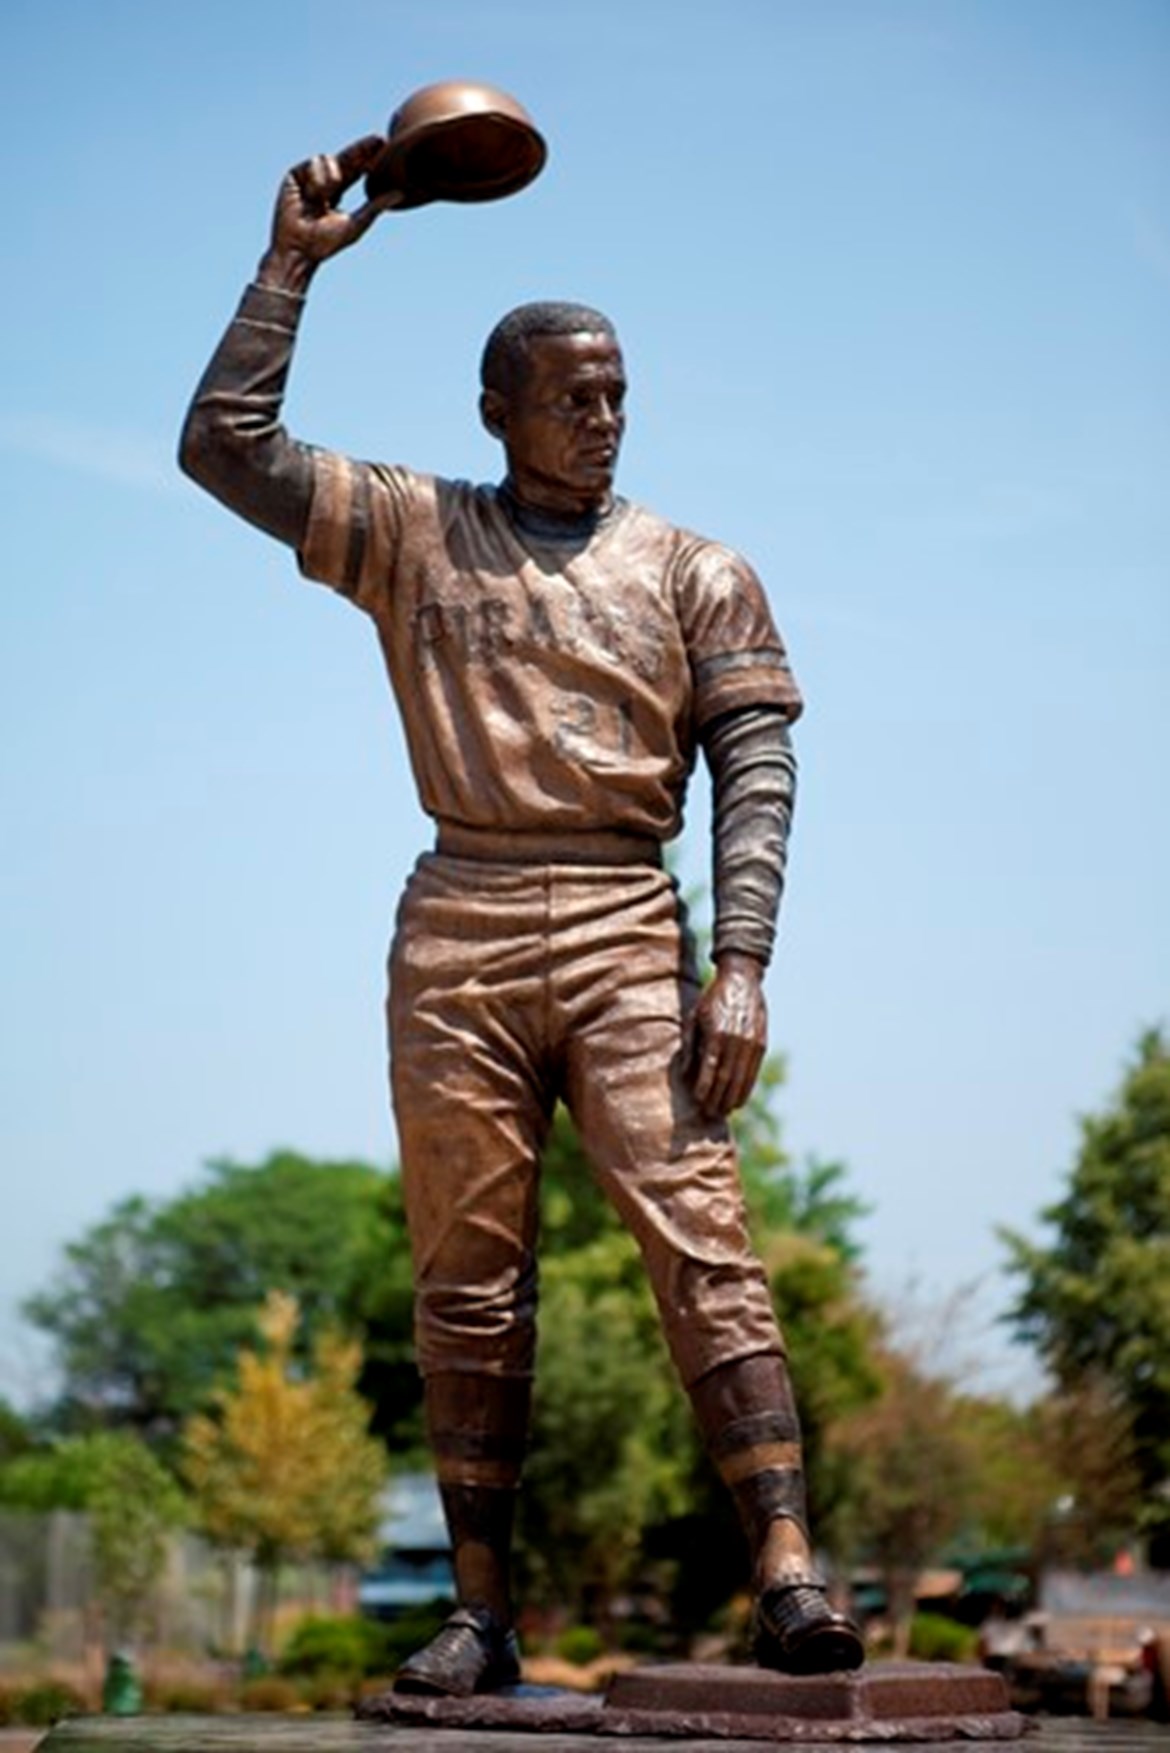 Press Release: Goya Honors the Lifetime Achievements of Roberto Clemente